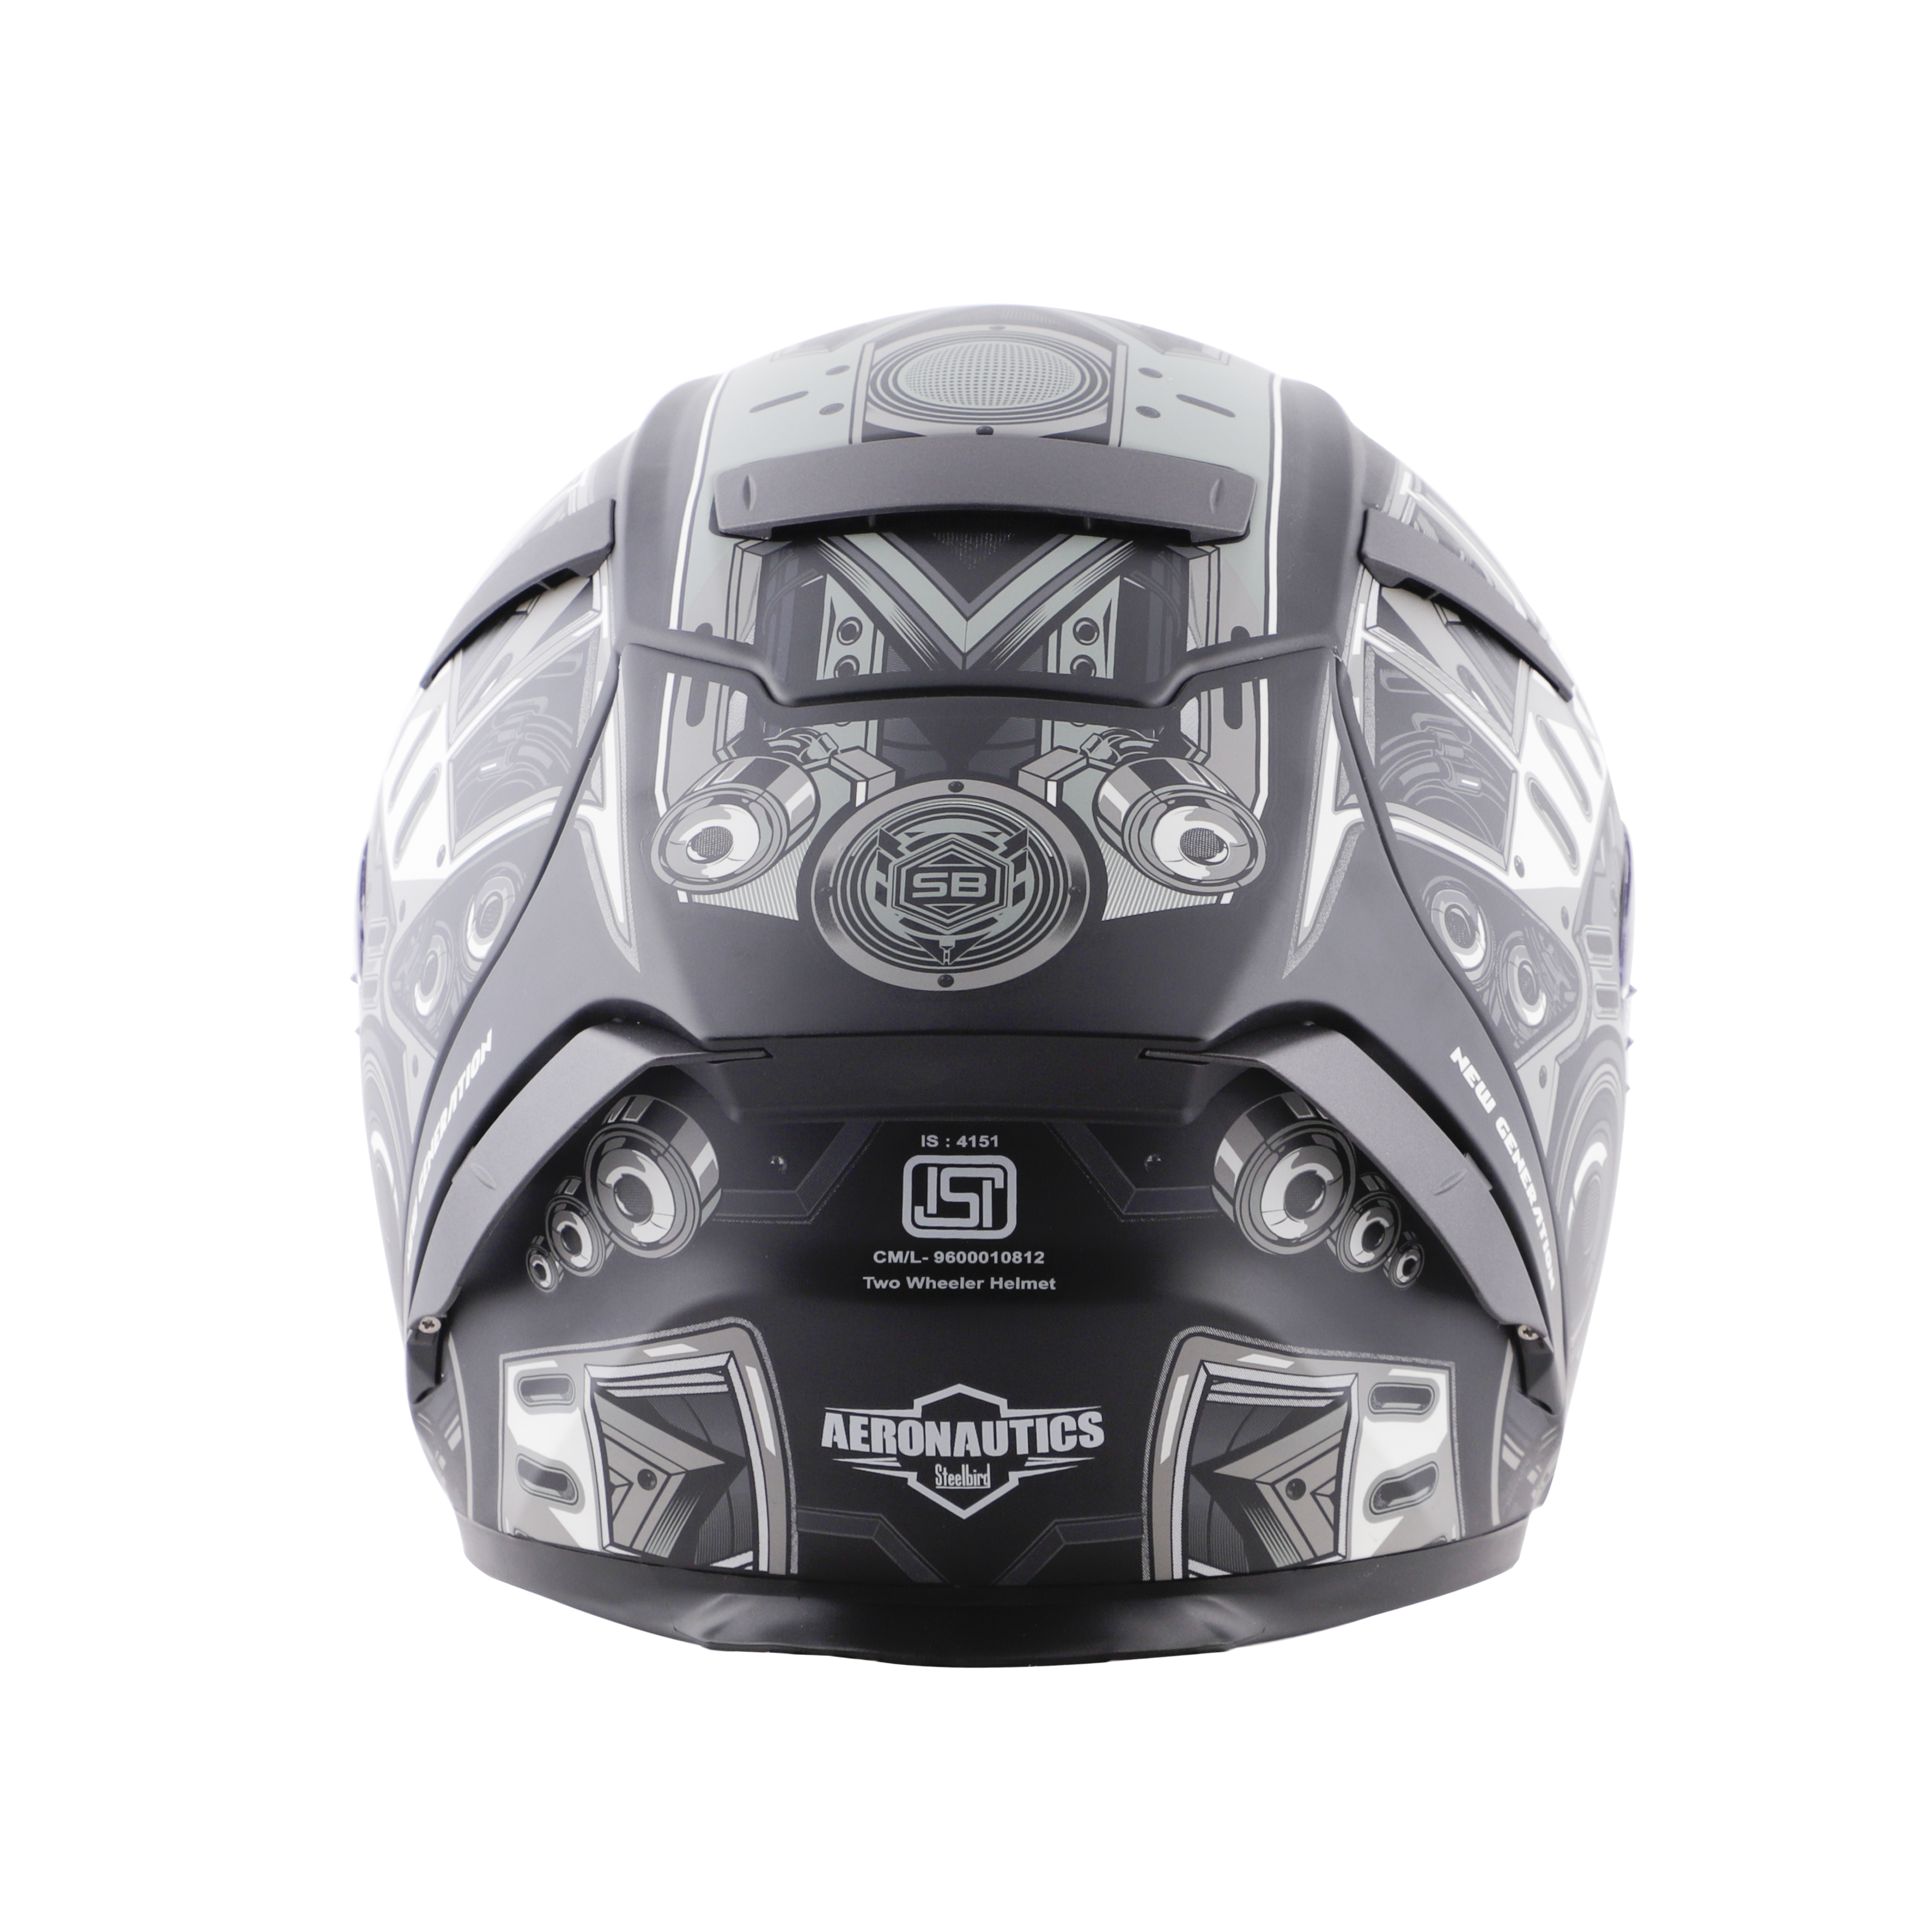 SA-2 TERMINATOR 2.0 MAT BLACK WITH GREY FITTED WITH CLEAR VISOR EXTRA SMOKE VISOR FREE (WITH ANTI-FOG SHIELD HOLDER)